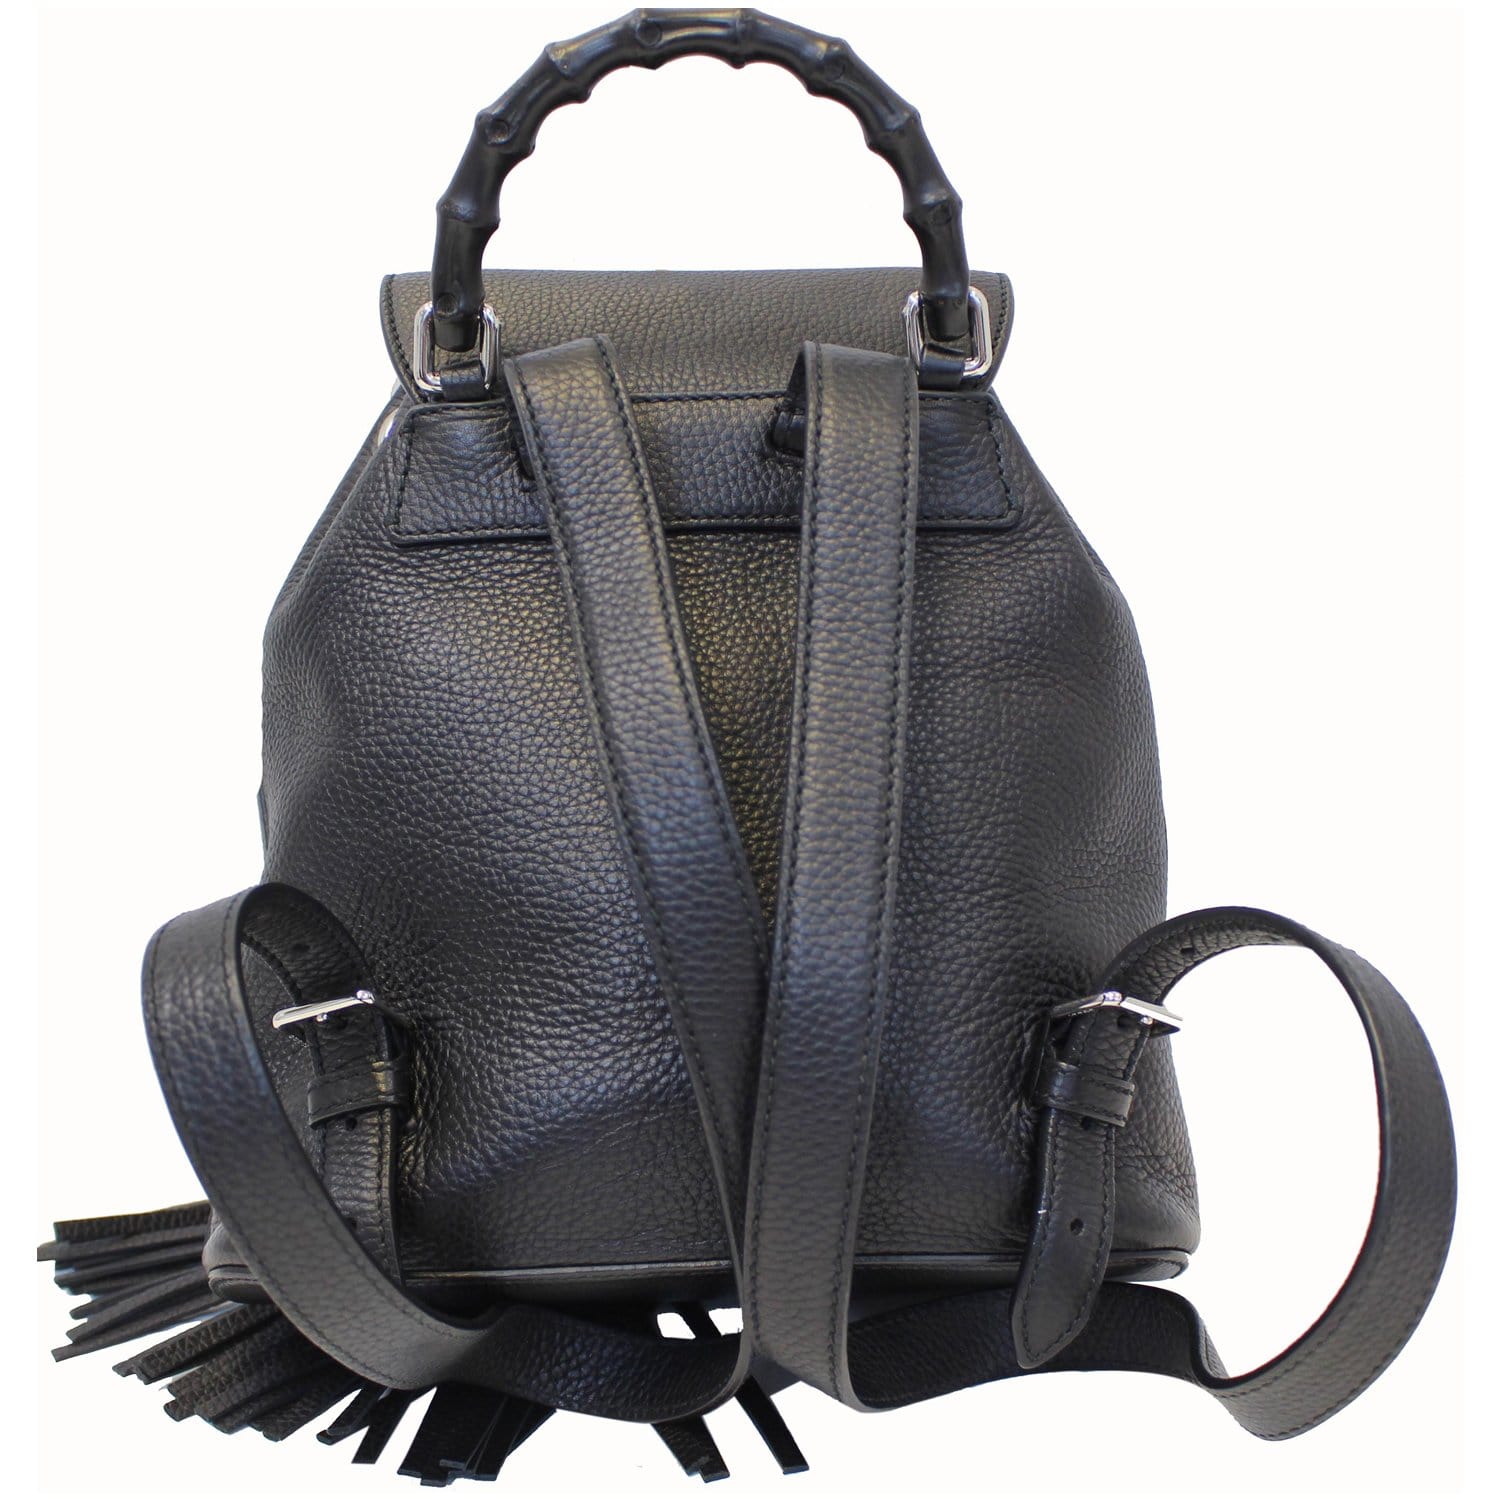 GUCCI BLACK LEATHER BAMBOO SHERRY LINE BACKPACK